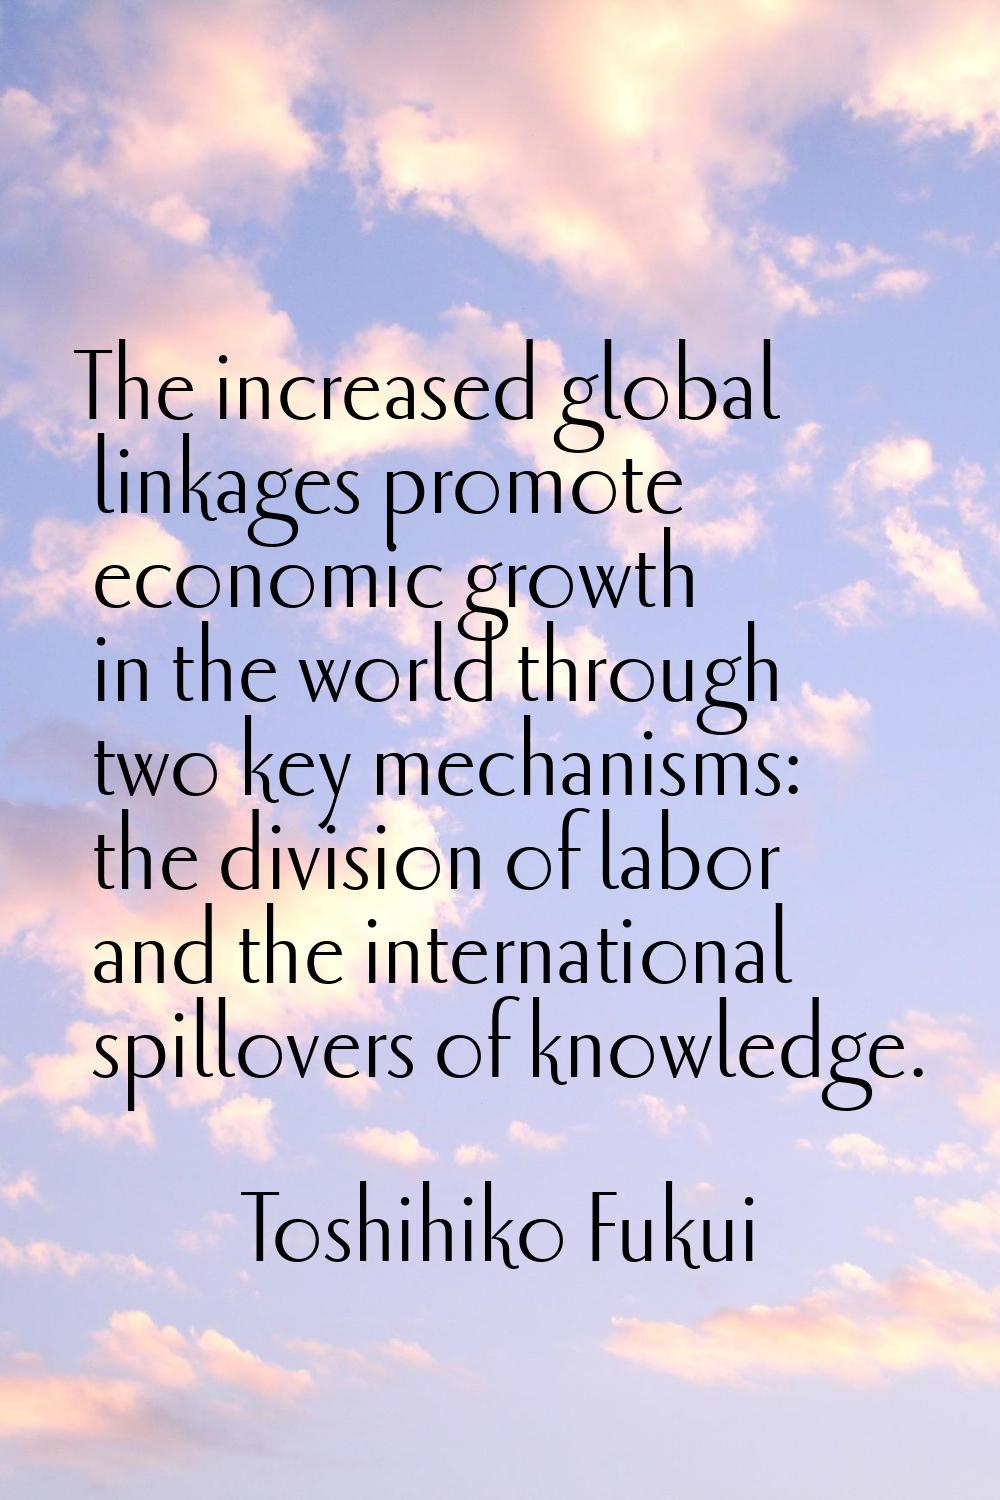 The increased global linkages promote economic growth in the world through two key mechanisms: the 